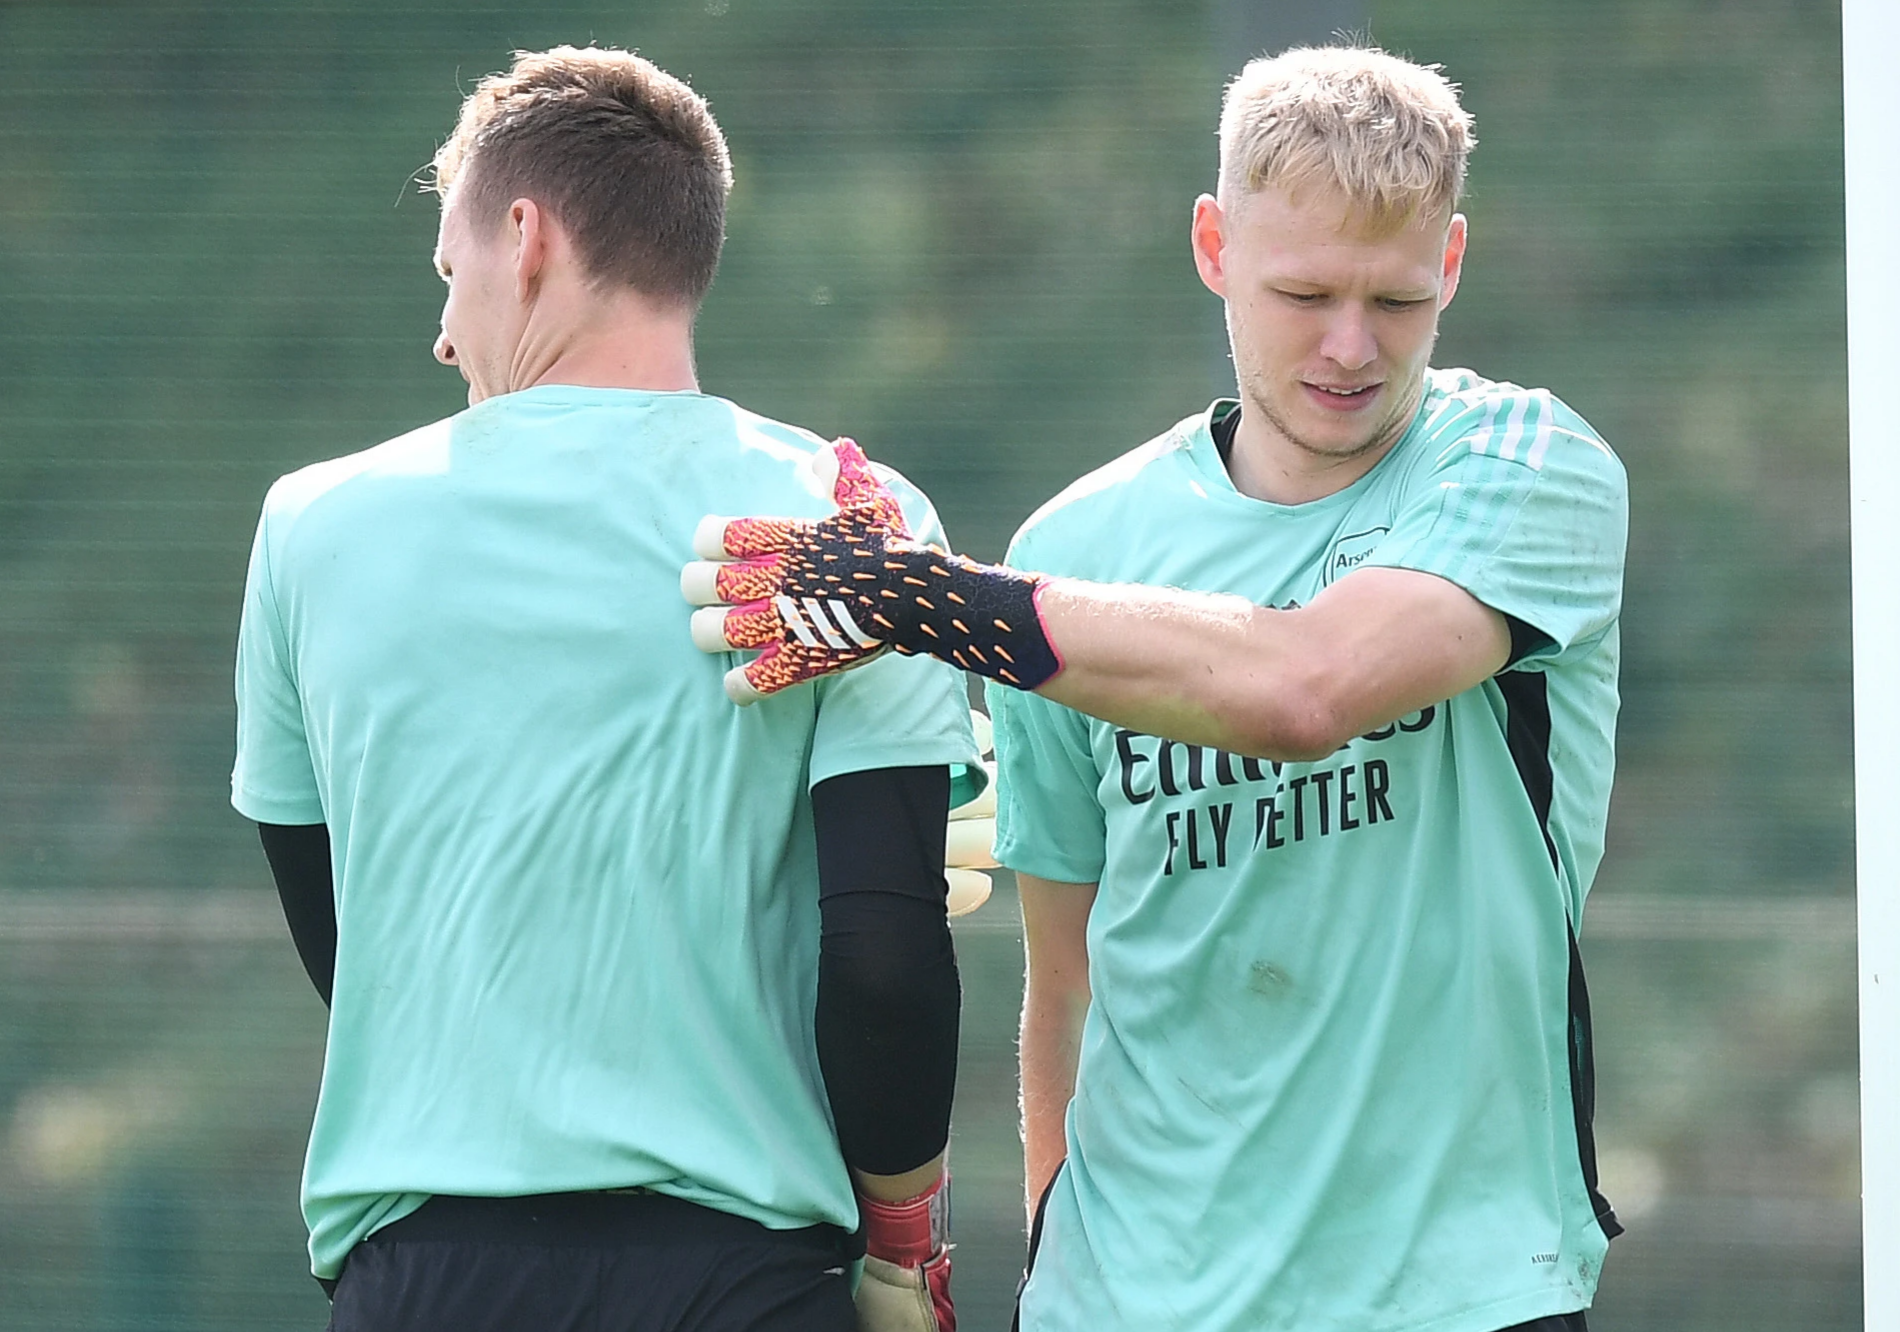 Arsenal boss Mikel Arteta speaks out on reports Bernd Leno reacted badly to being dropped